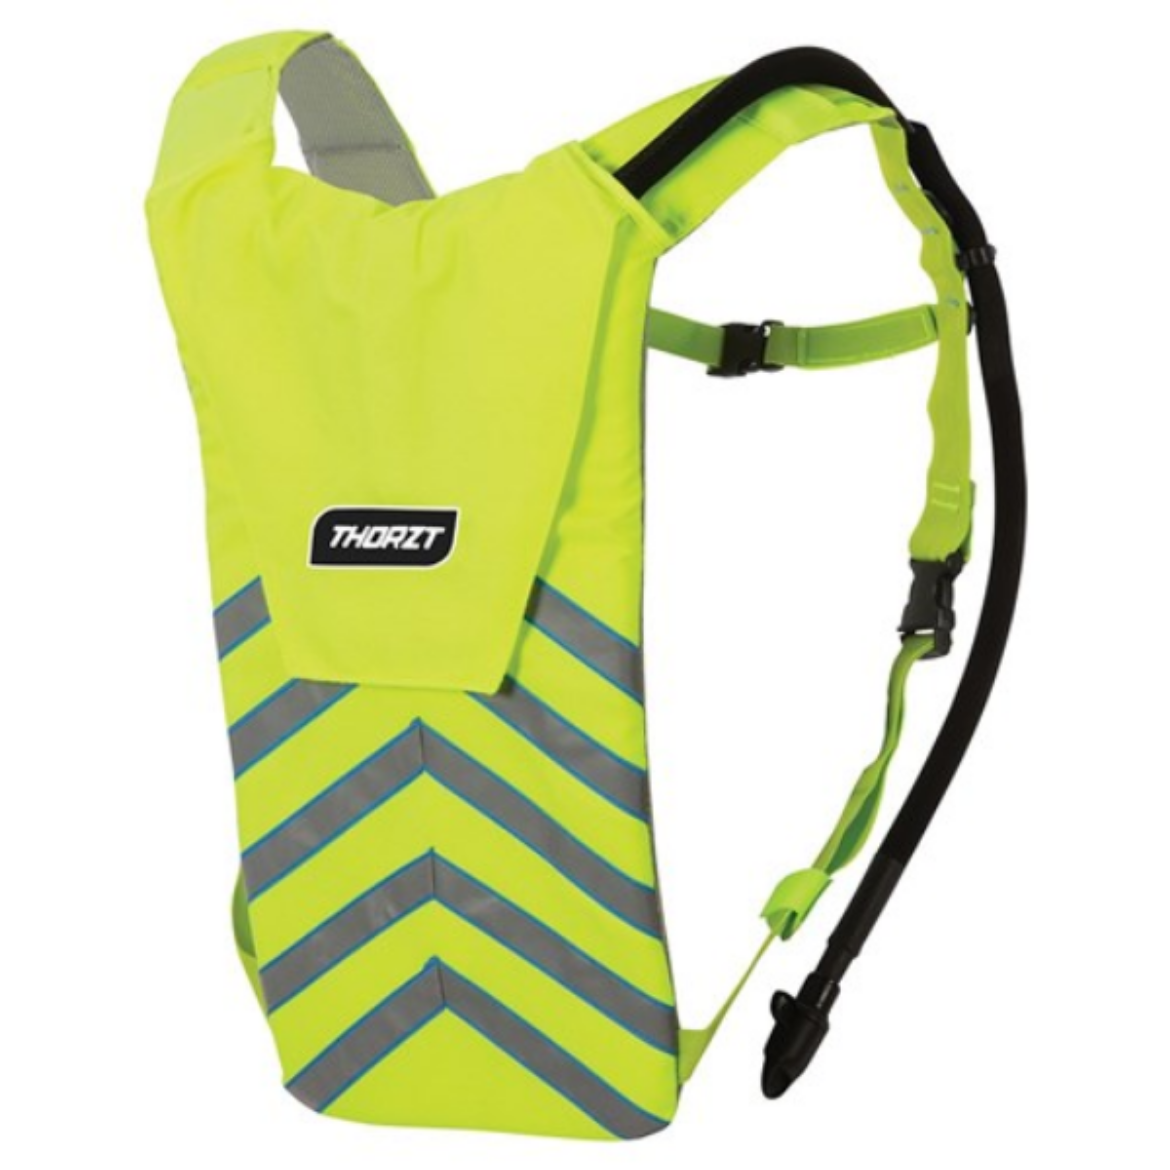 Picture of THORZT HYDRATION BACK PACK HI VIS YELLOW 3L